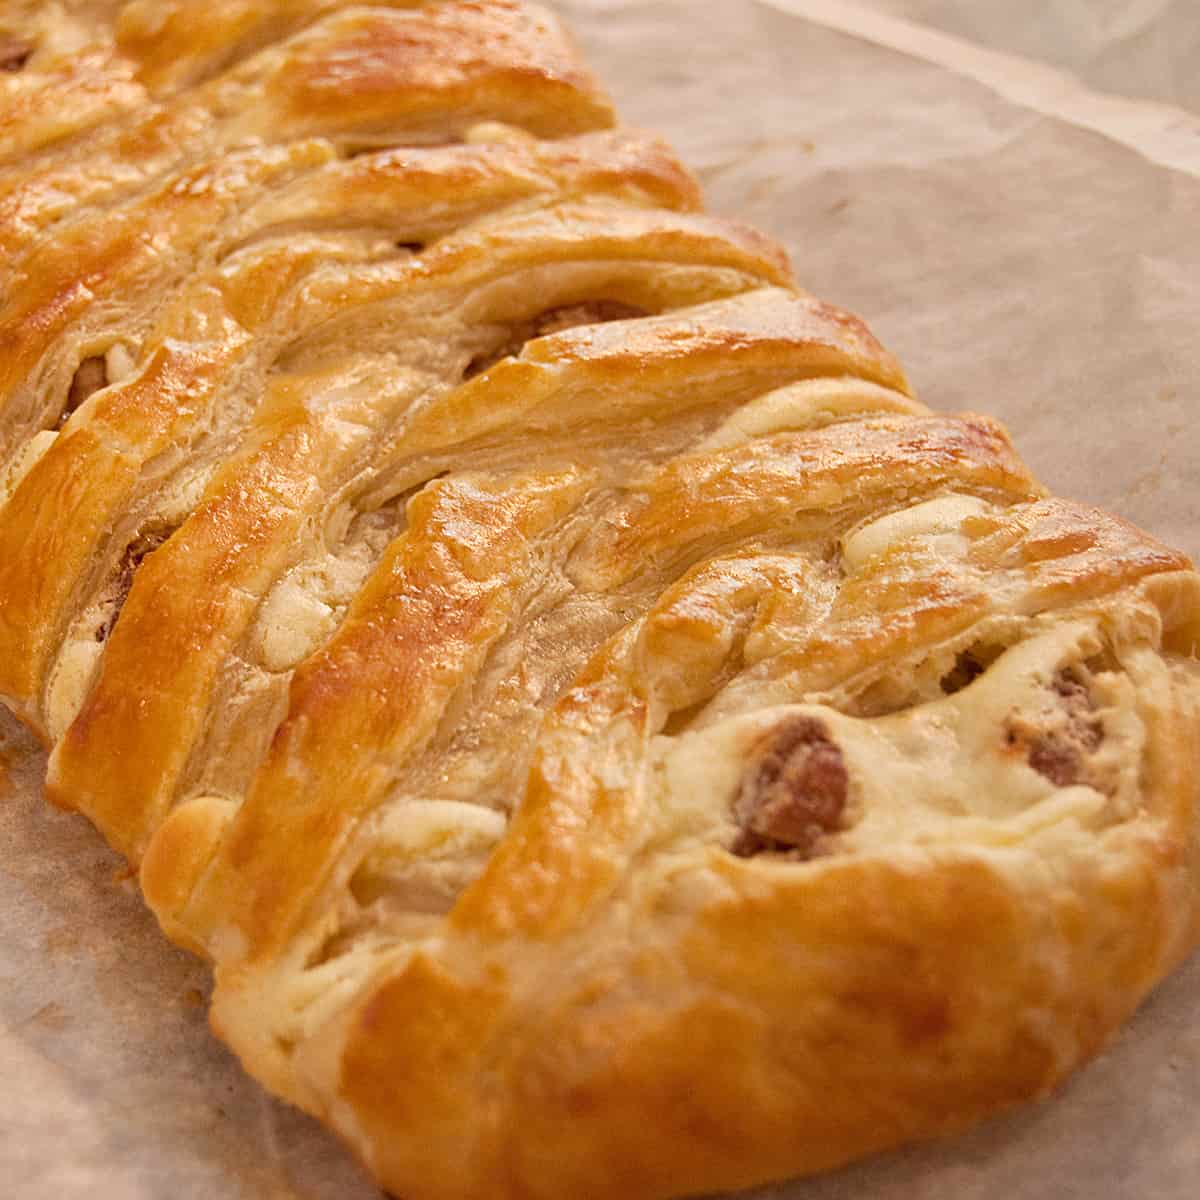 Finished braided danish cooling on parchment paper.